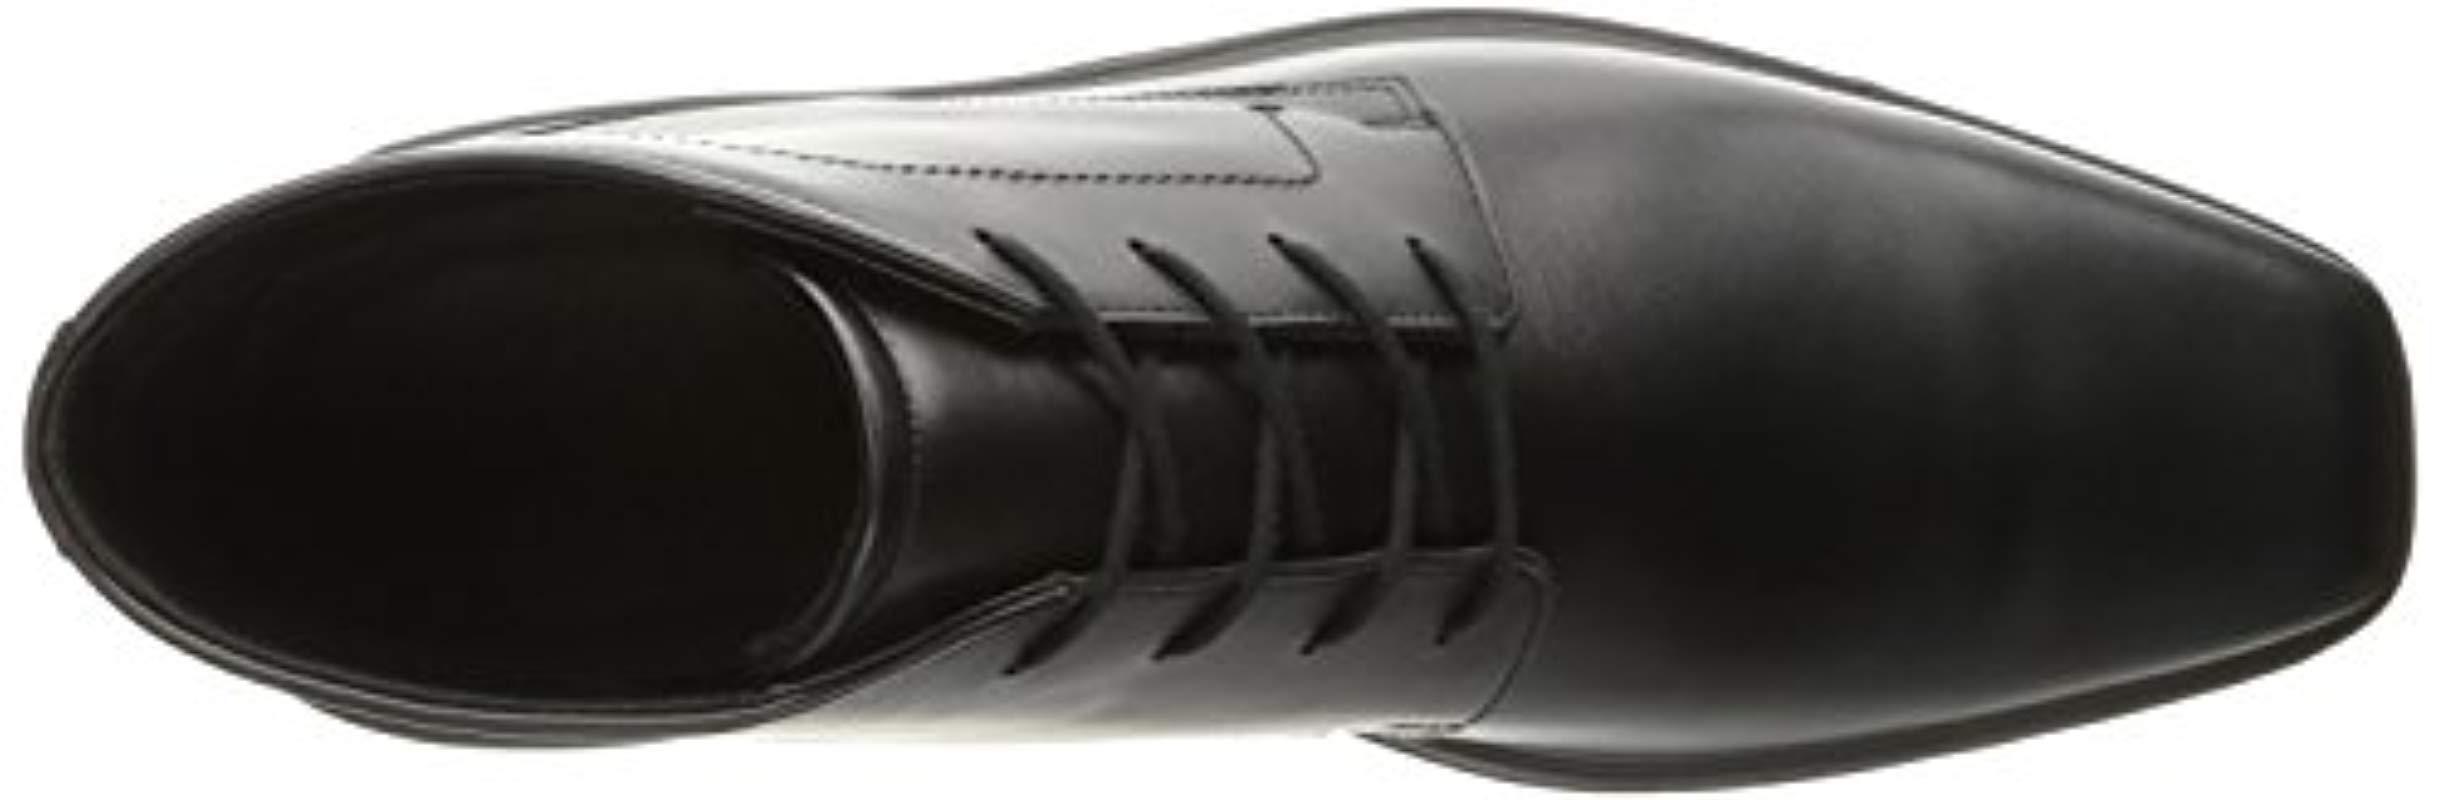 Ecco Leather Johannesburg Ankle Boots in Black for Men - Lyst